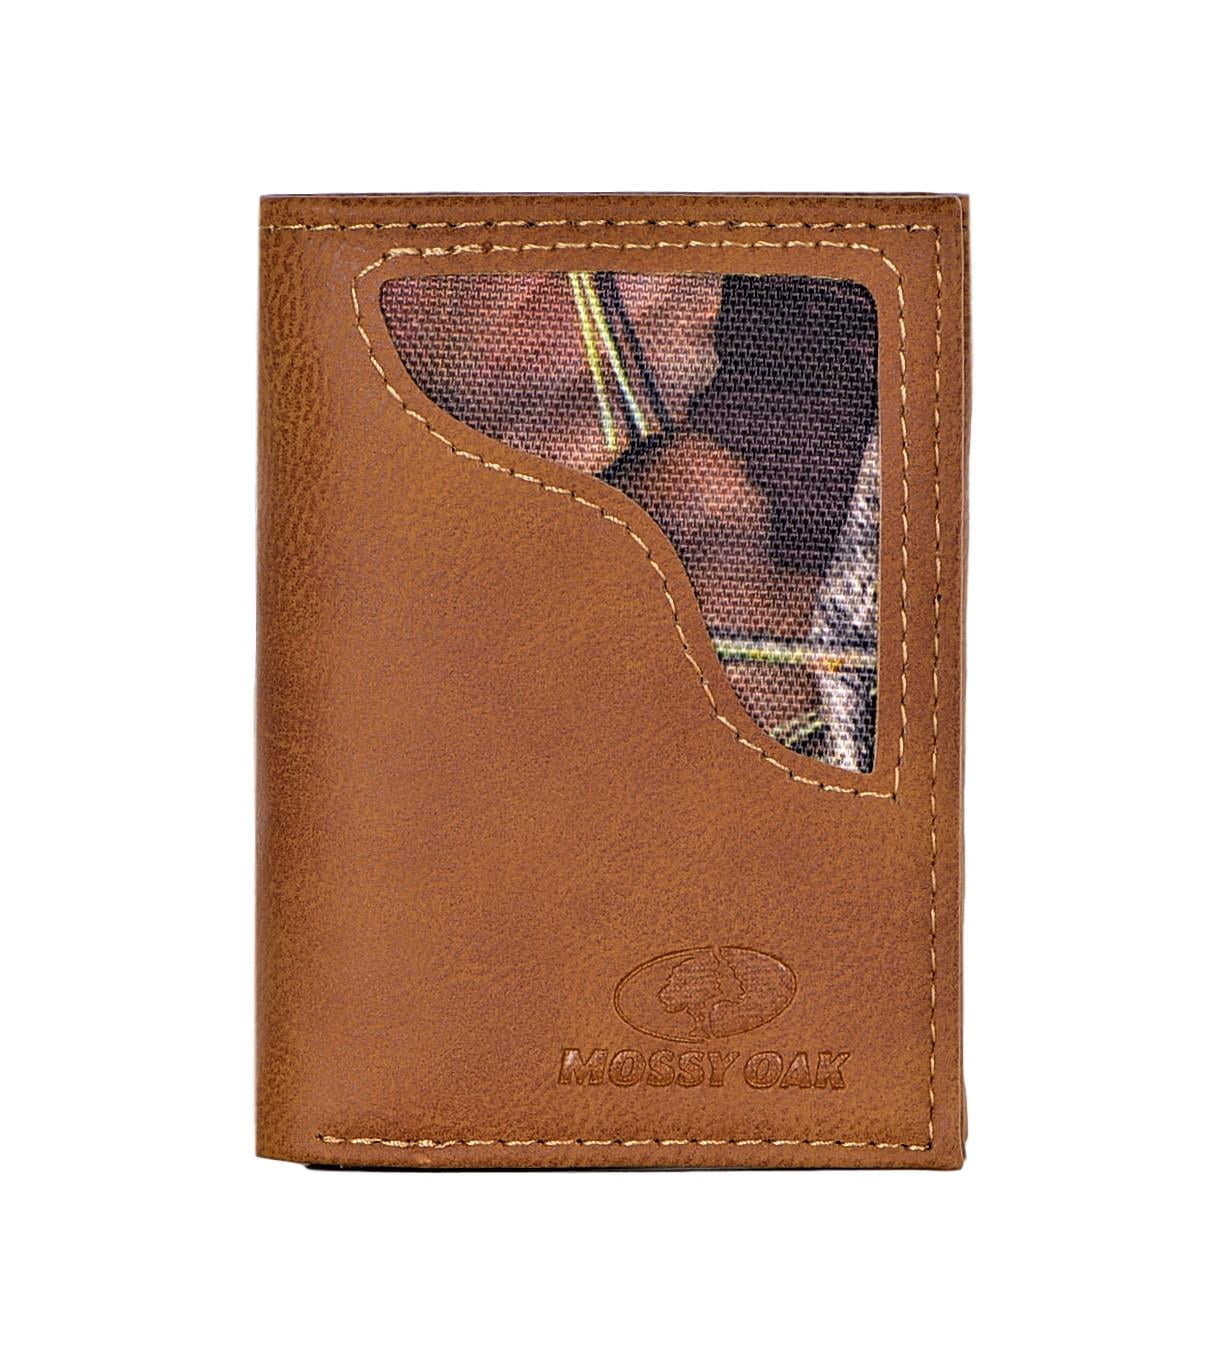 ZEP-PRO NCAA Mens Mossy Oak Nylon and Leather Passcase Concho Wallet 